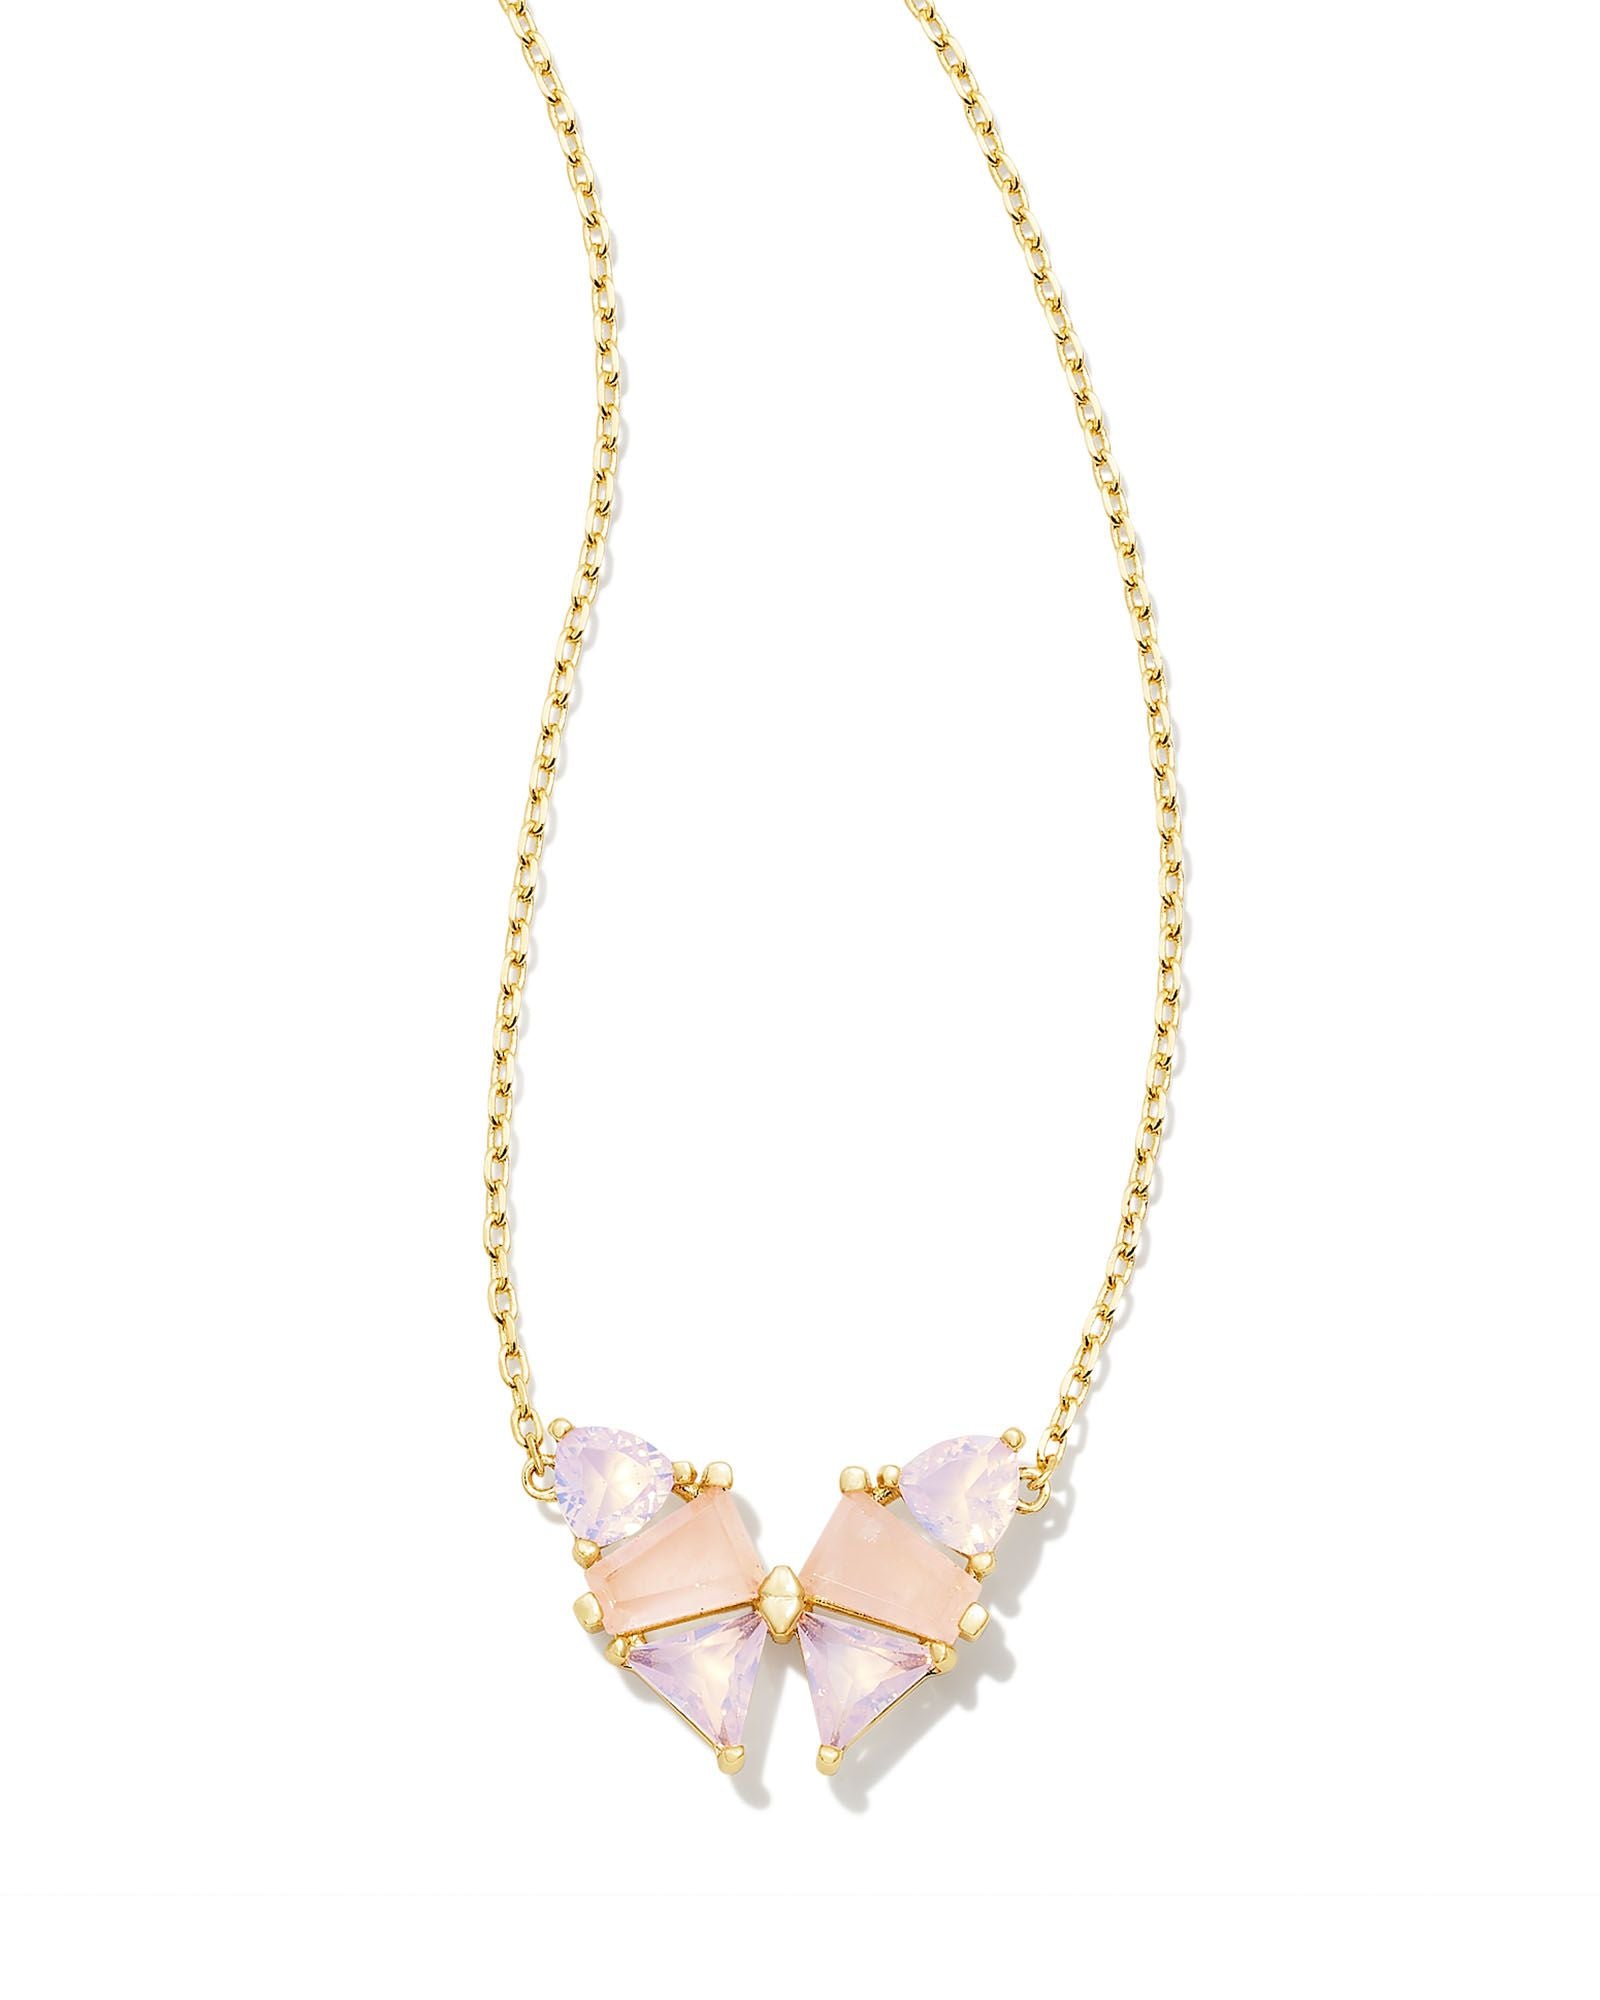 Blair Butterfly Pendant Necklace Gold Pink Mix